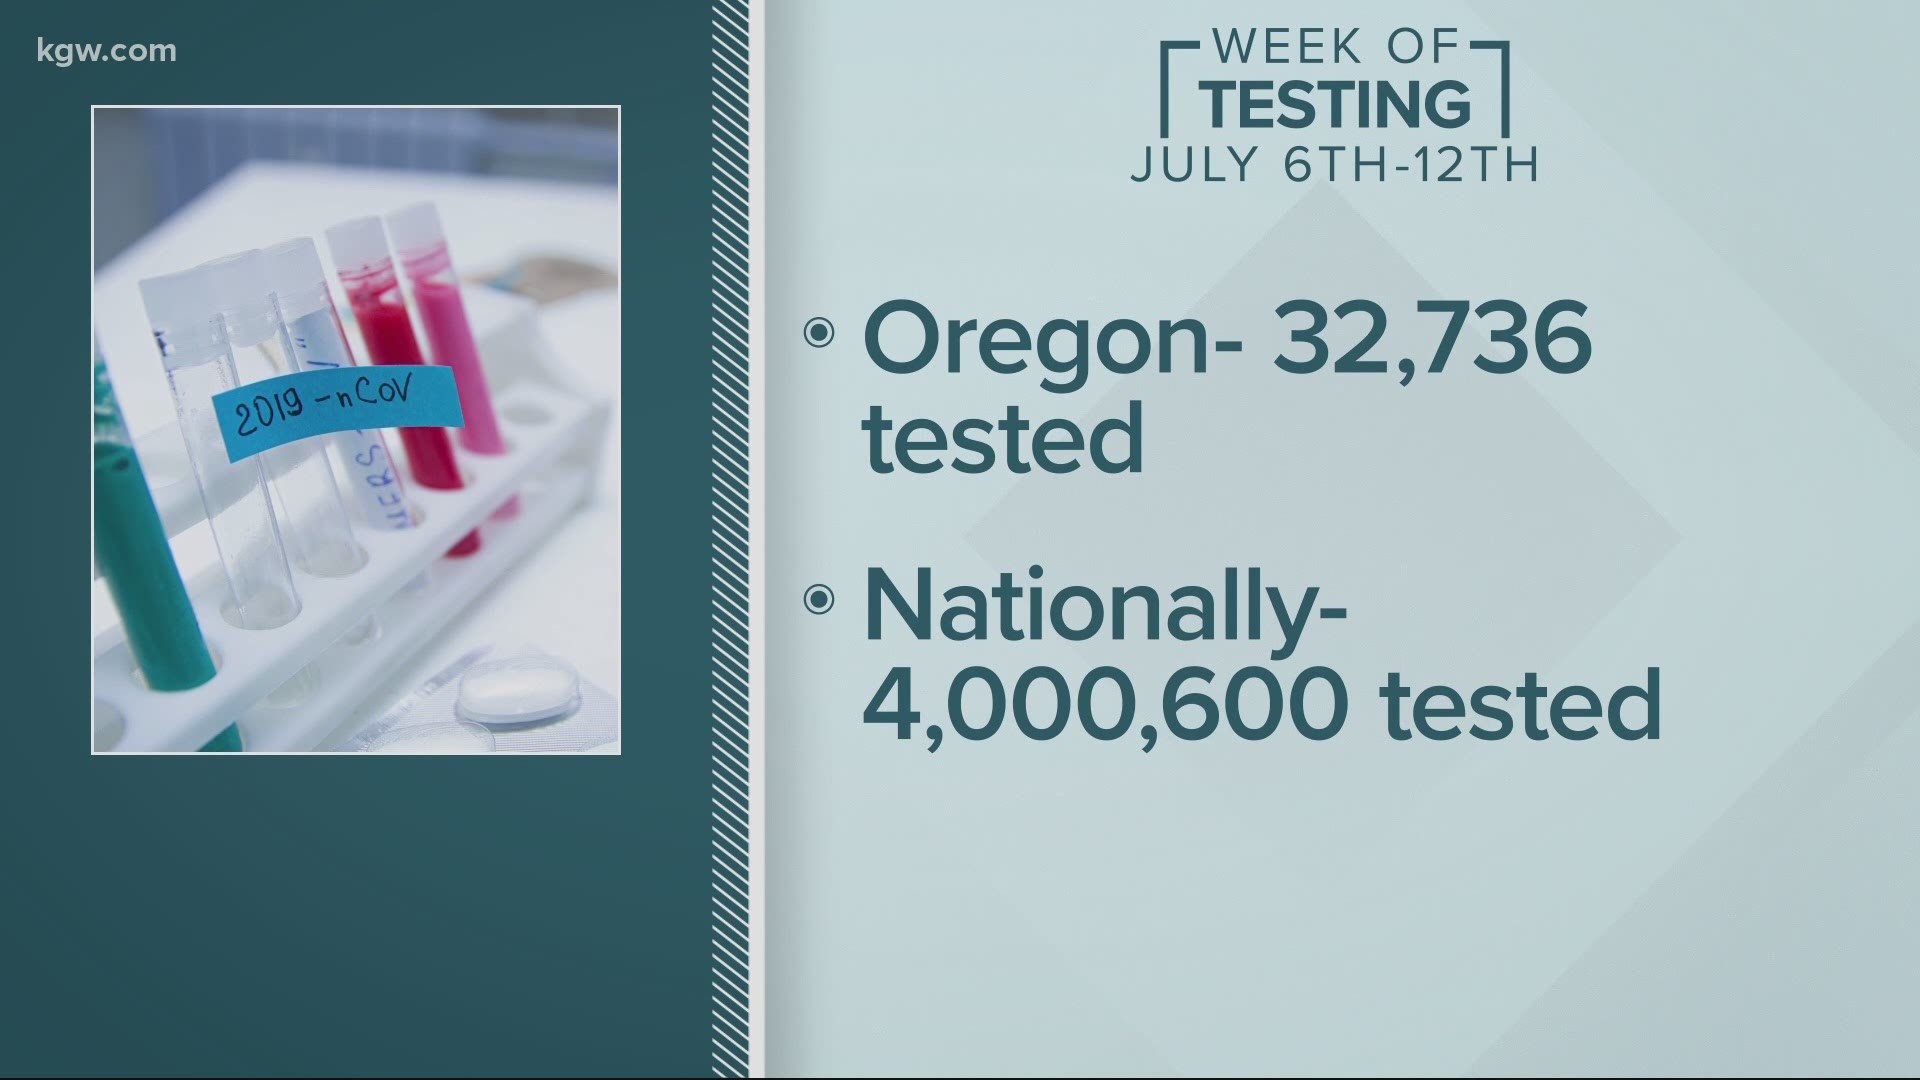 As coronavirus cases rise locally and across the country, testing resources are being strained and it may take a week or longer to get results.